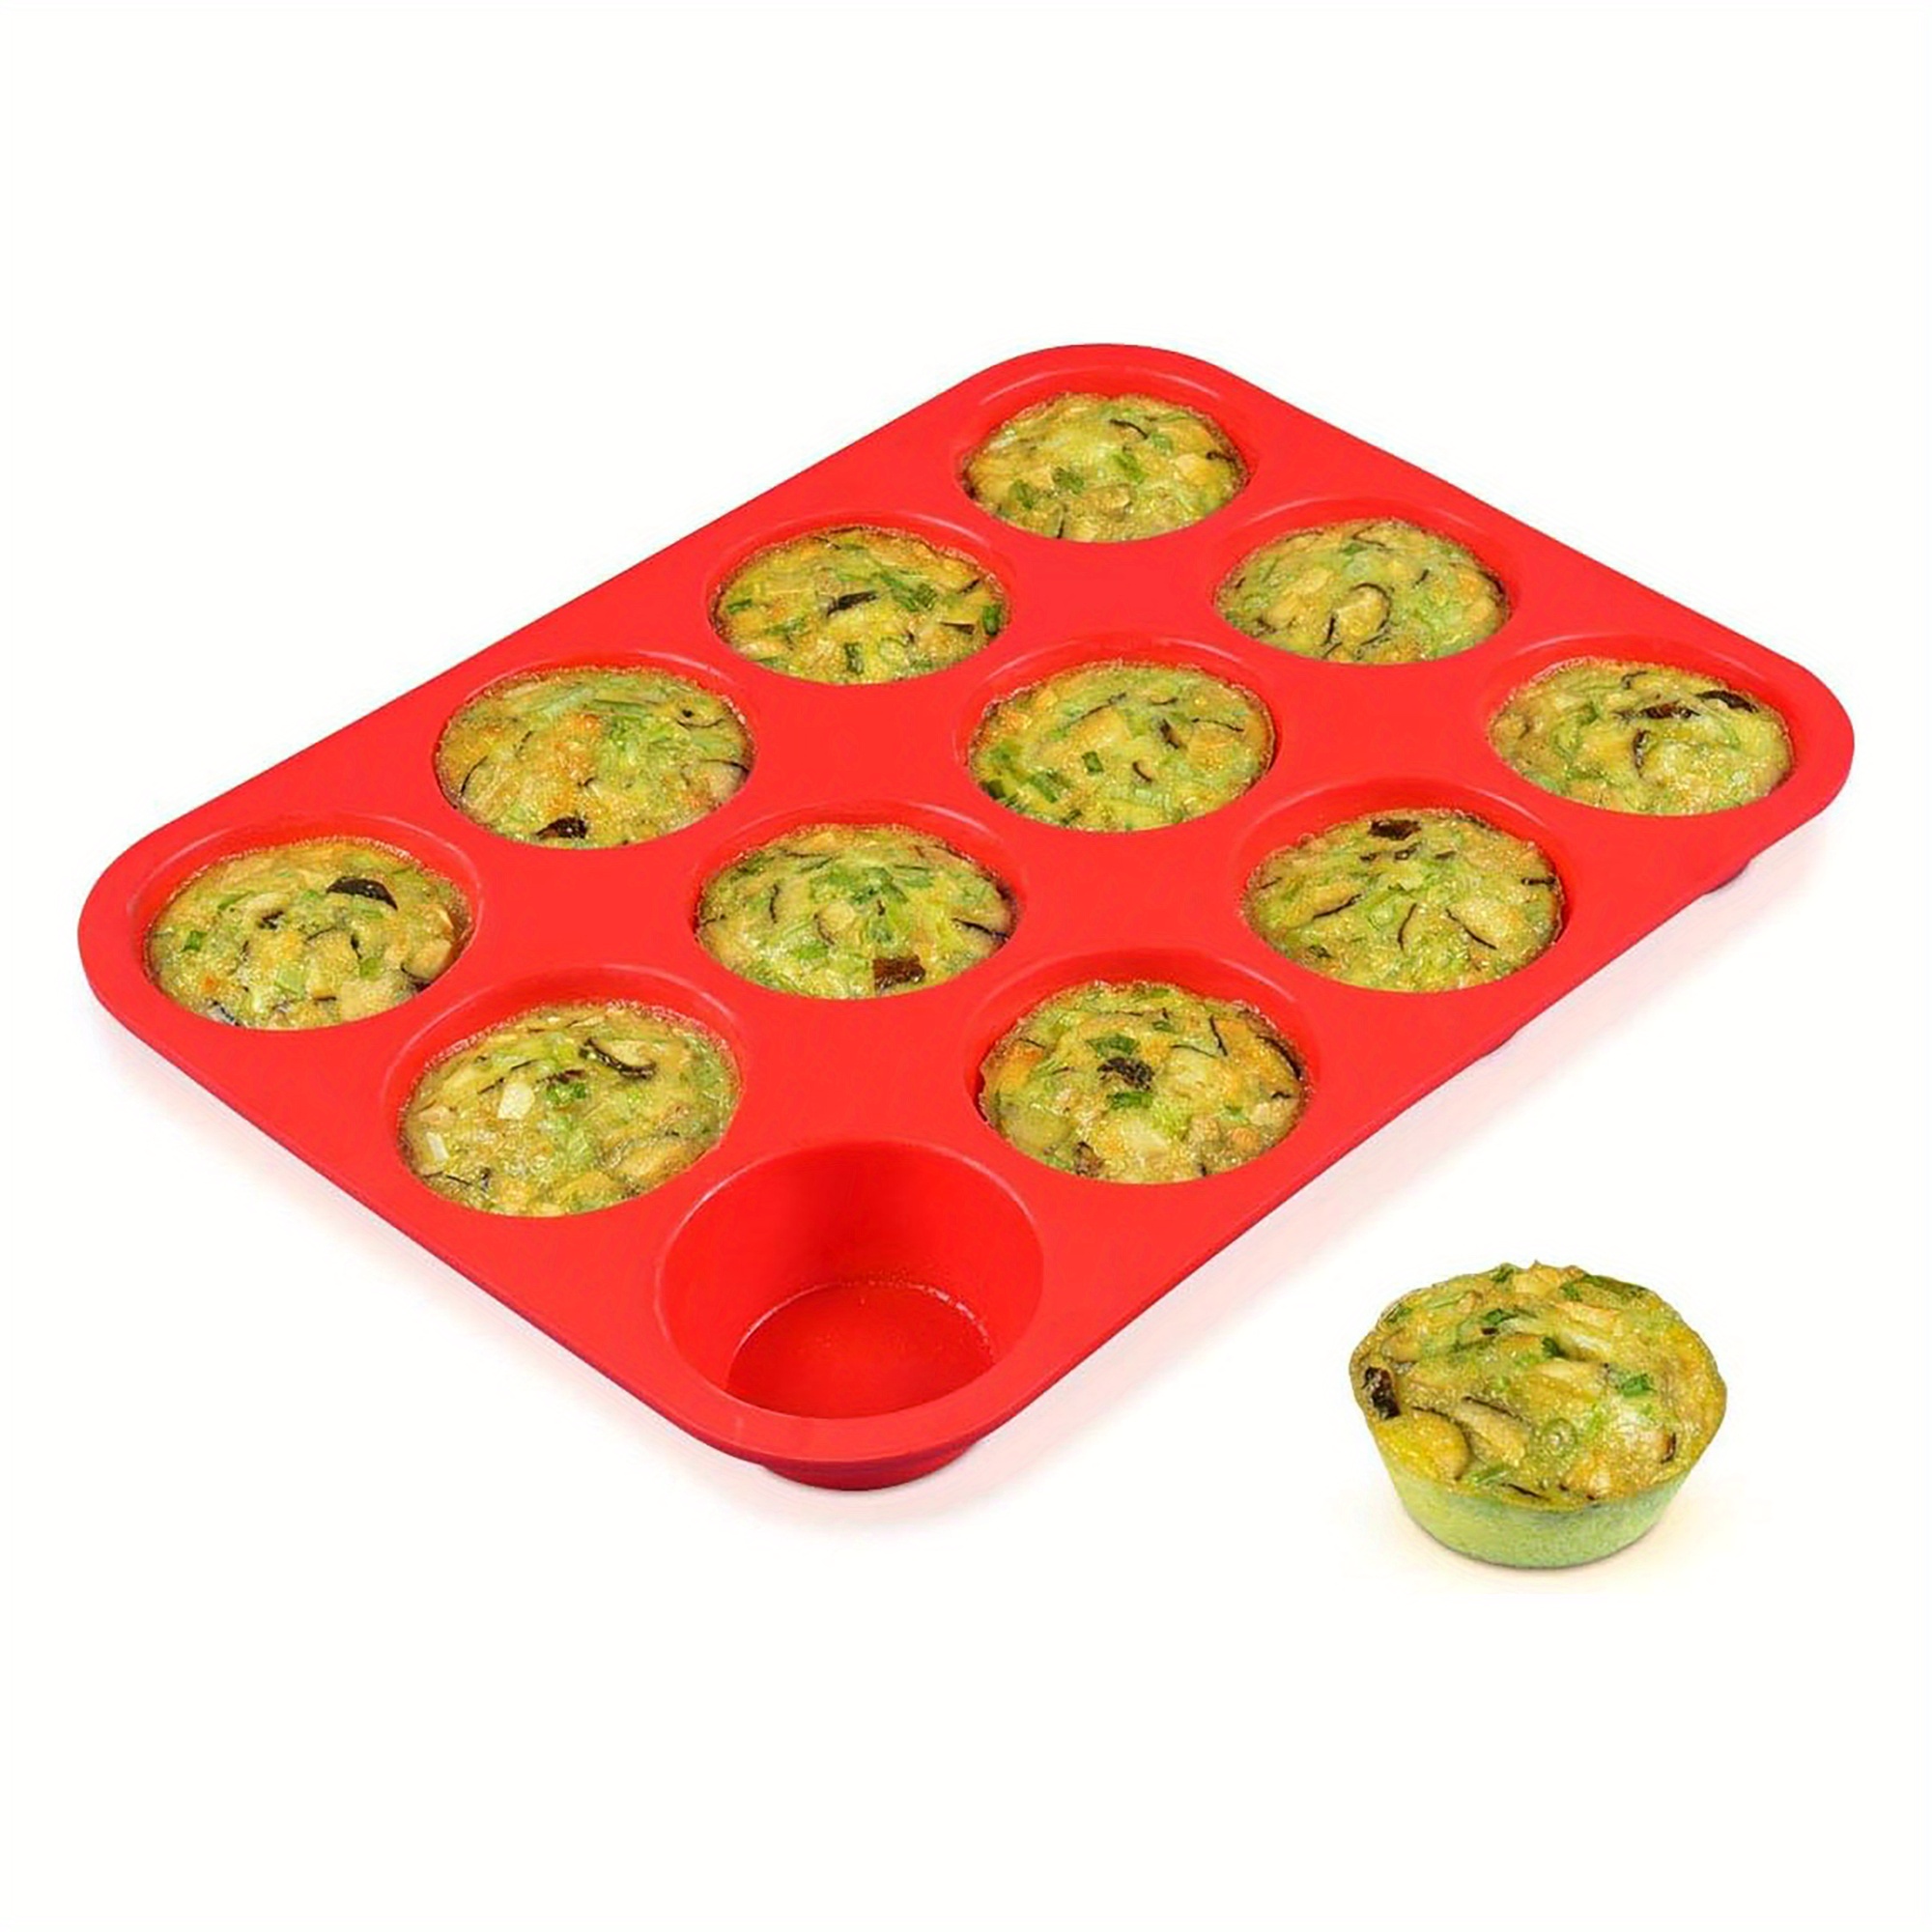 

12-cup Silicone Muffin Pan - Nonstick, Bpa-free Cupcake Baking Mold, Easy To Clean And Oven Safe